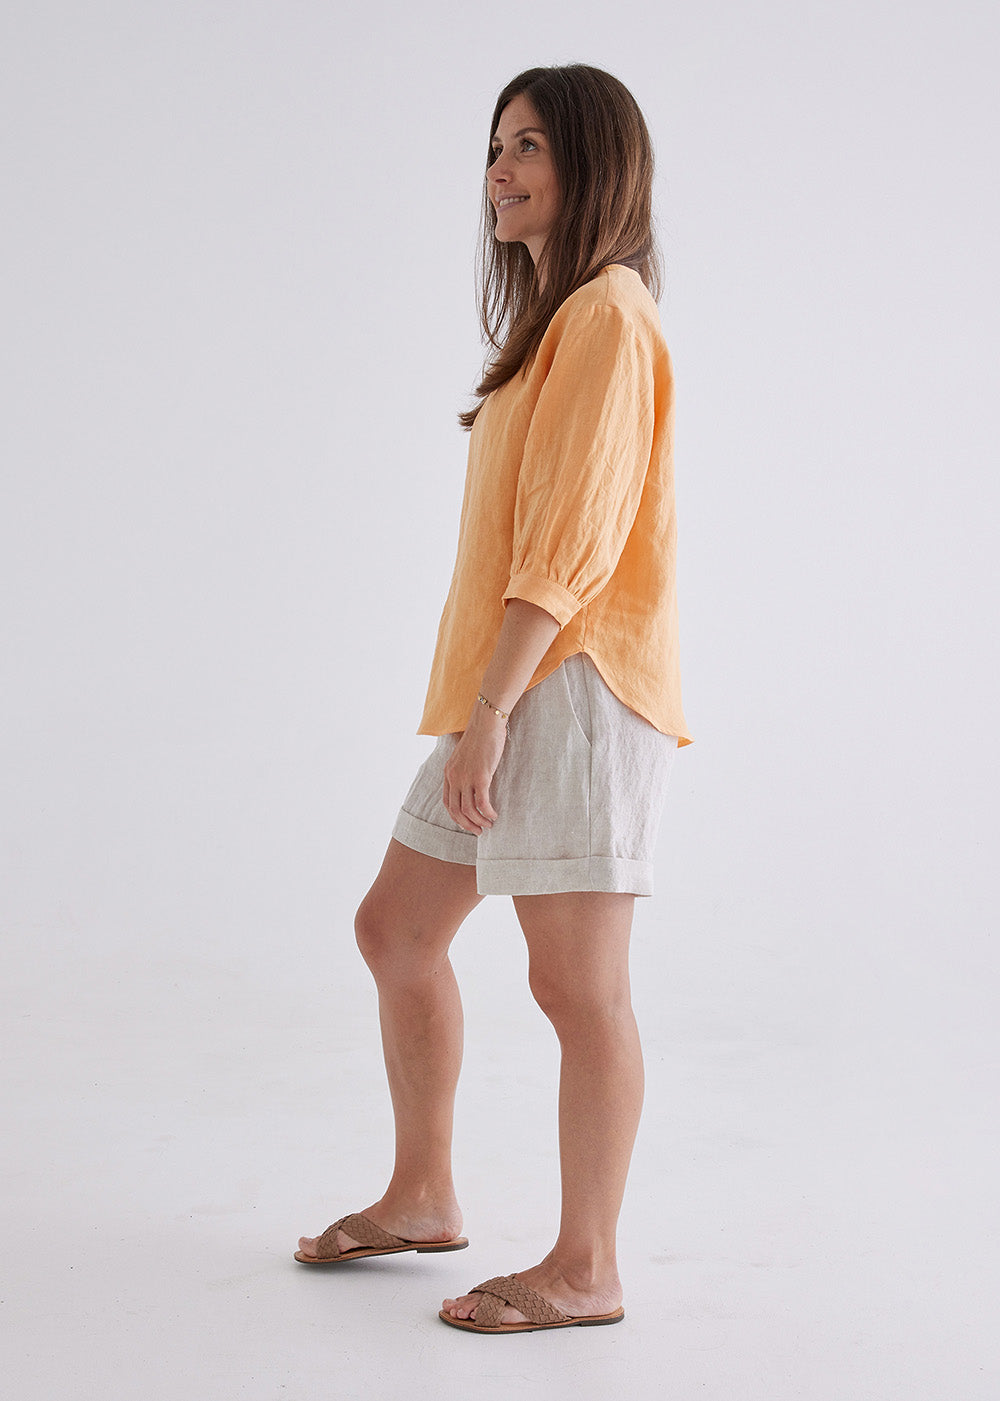 Laura Linen Top in Apricot